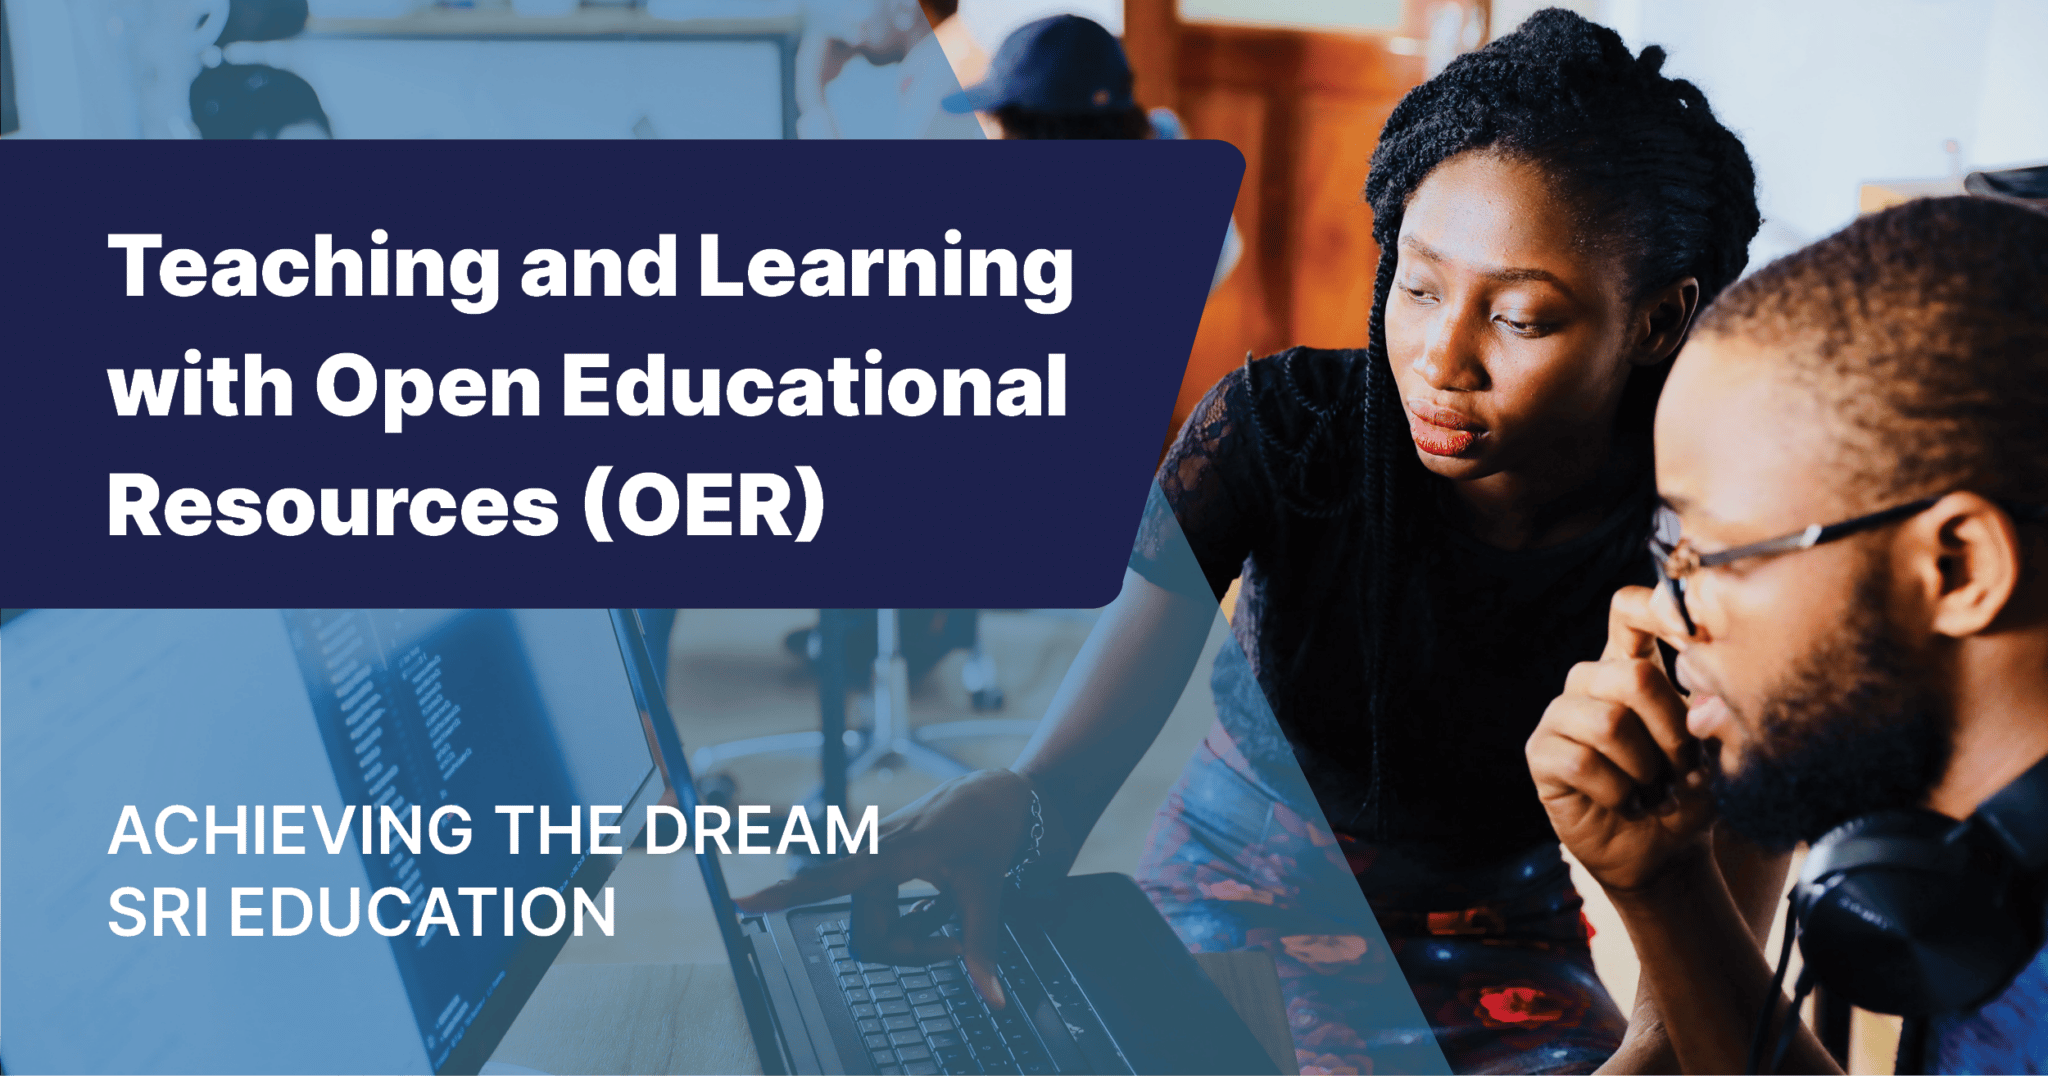 Teaching and learning with open educational resources (OER)